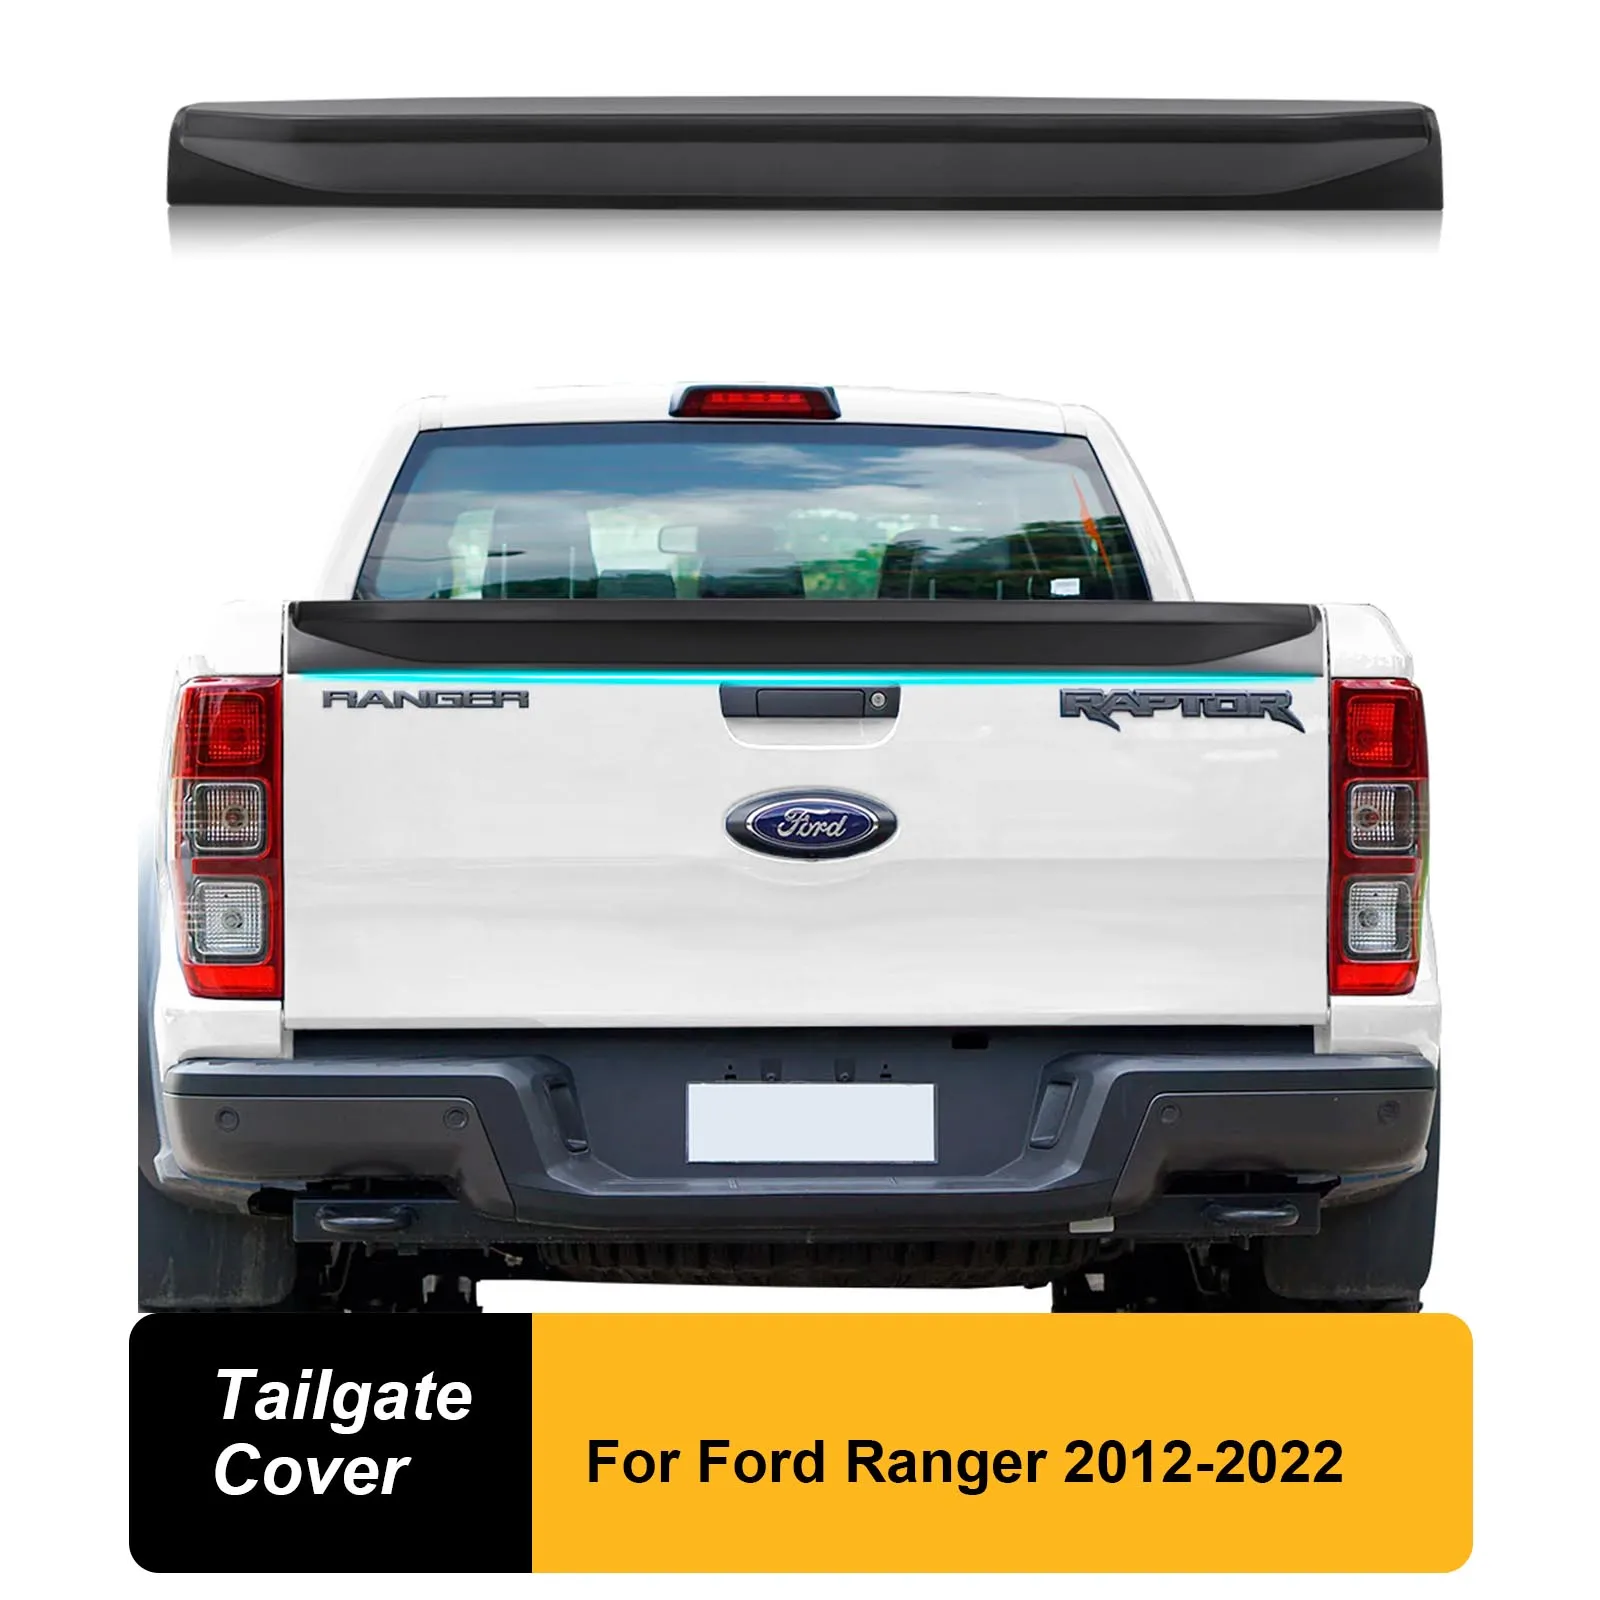 

Matte Black Tailgate Cover For Ford Ranger 2012-2022 T6 T7 T8 Dual Cab Models Spoiler Rear Gate Trim Cover 4x4 Car Accessories